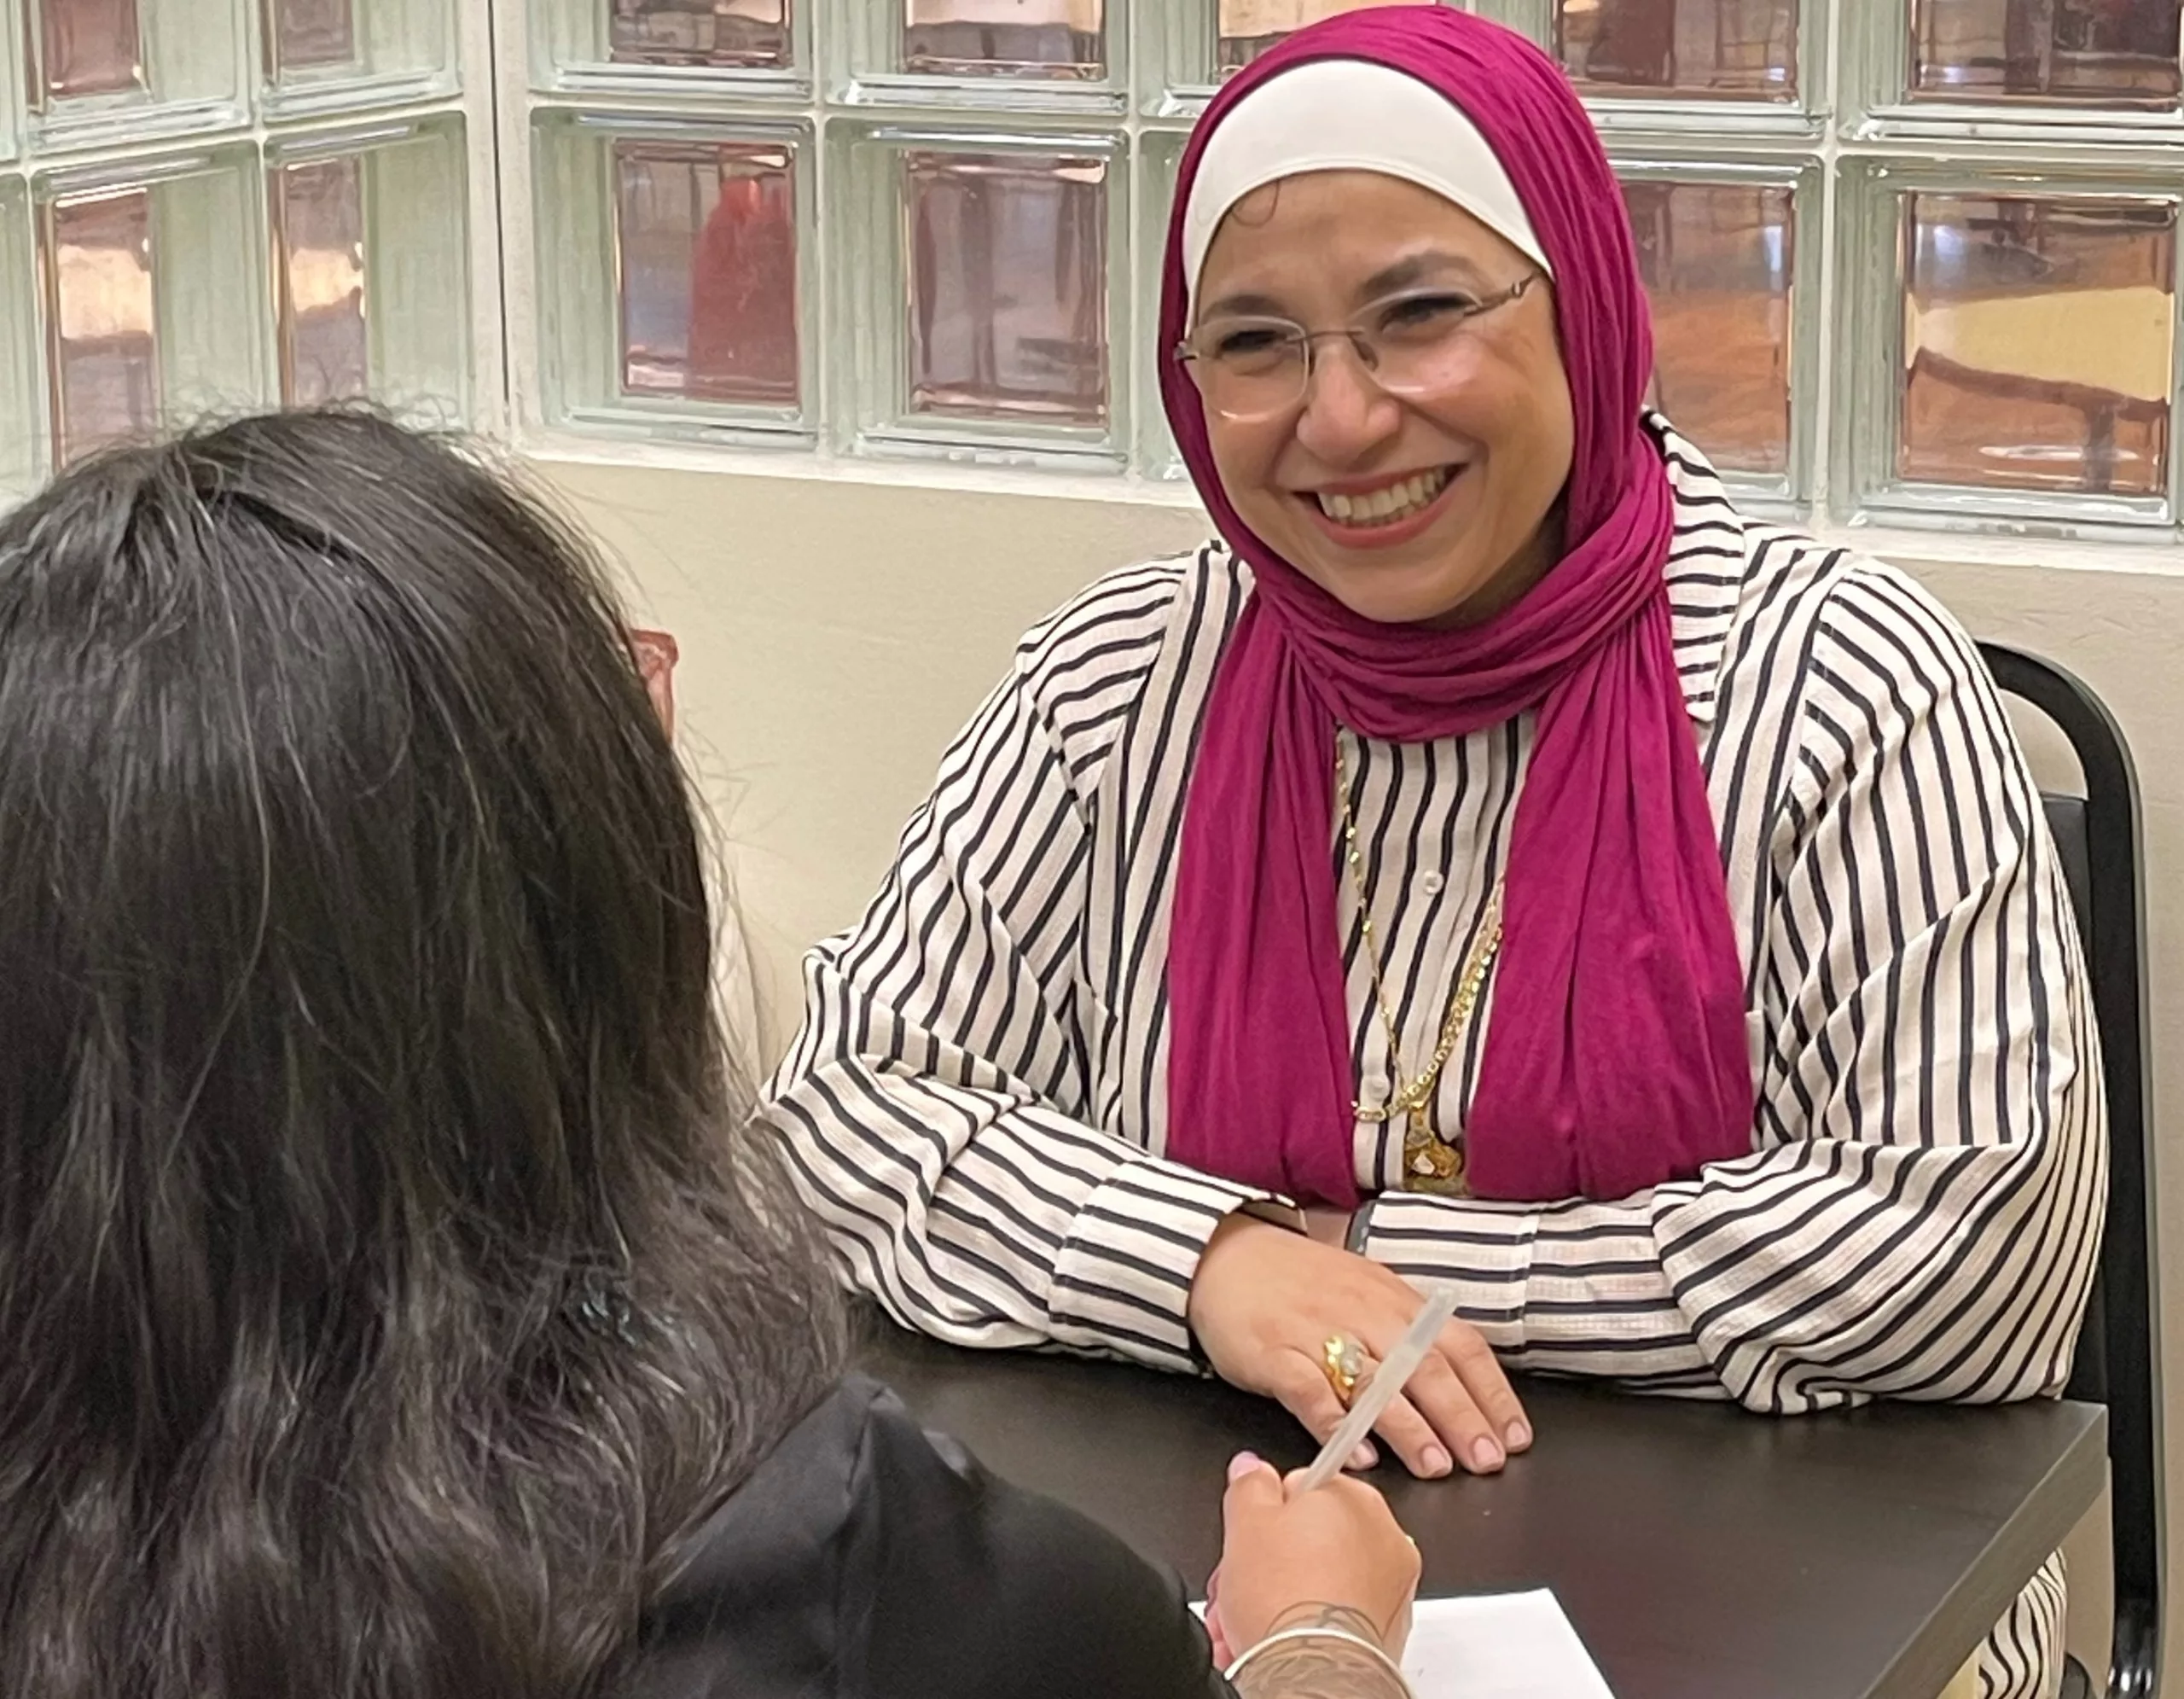 A woman smiling while helping another woman with legal support